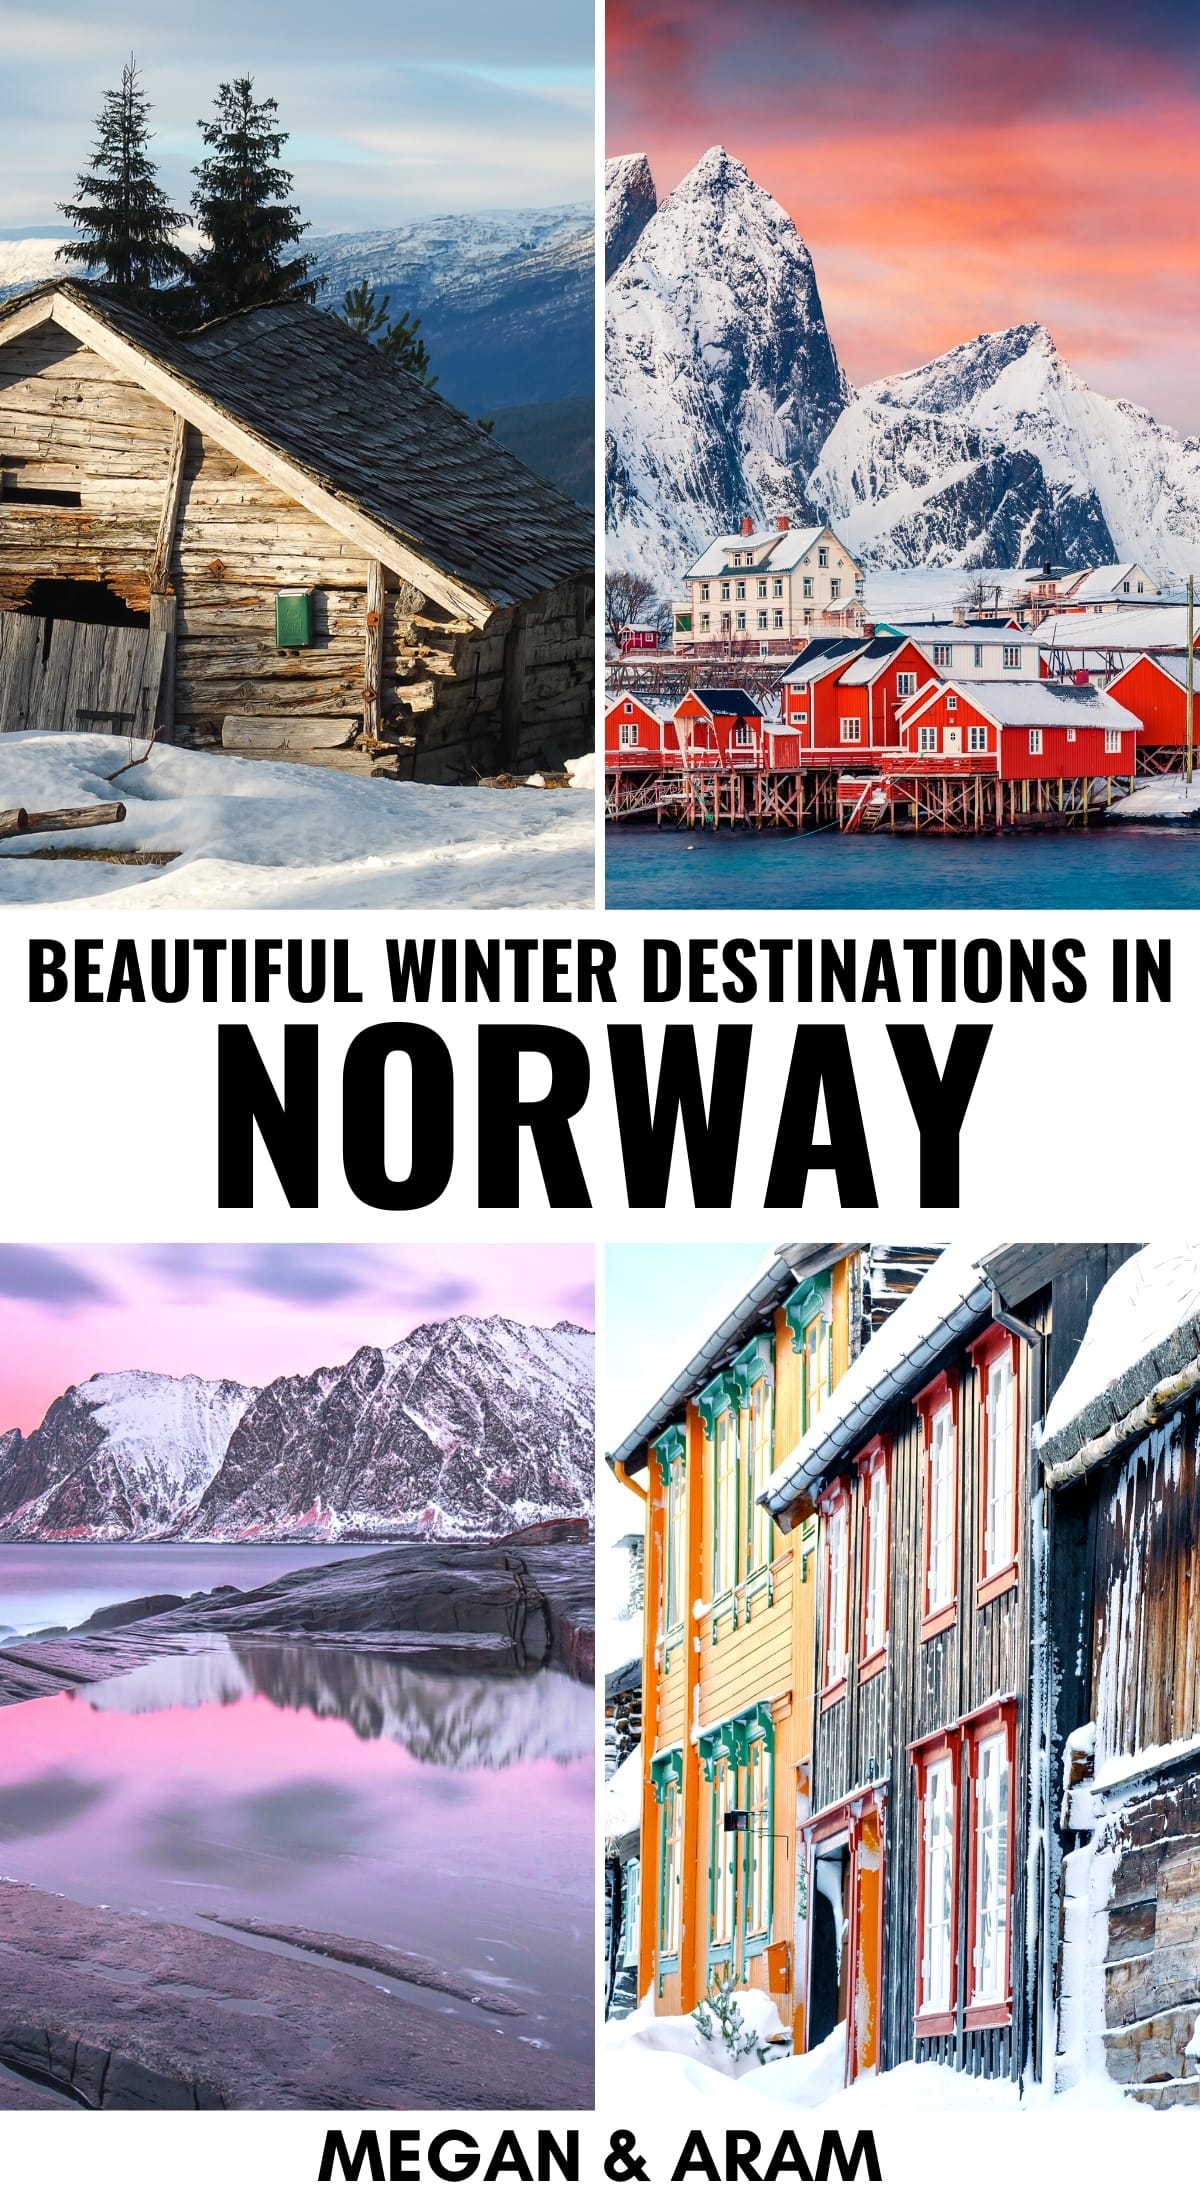 Considering a trip to Norway in winter? This guide will walk you through the best places to visit in Norway in winter and tell you the pros and cons of each. Tromsø excluded! | Places to visit in Norway | Norway in winter | Norway winter trips | Norway winter destinations | Tromsø | Lofoten Islands | Bergen | Oslo | Northern lights in Norway | Where to see the northern lights in Norway | Visit Norway | Winter in Norway | Christmas in Norway | Norway in December | Norway destinations | Norway nature